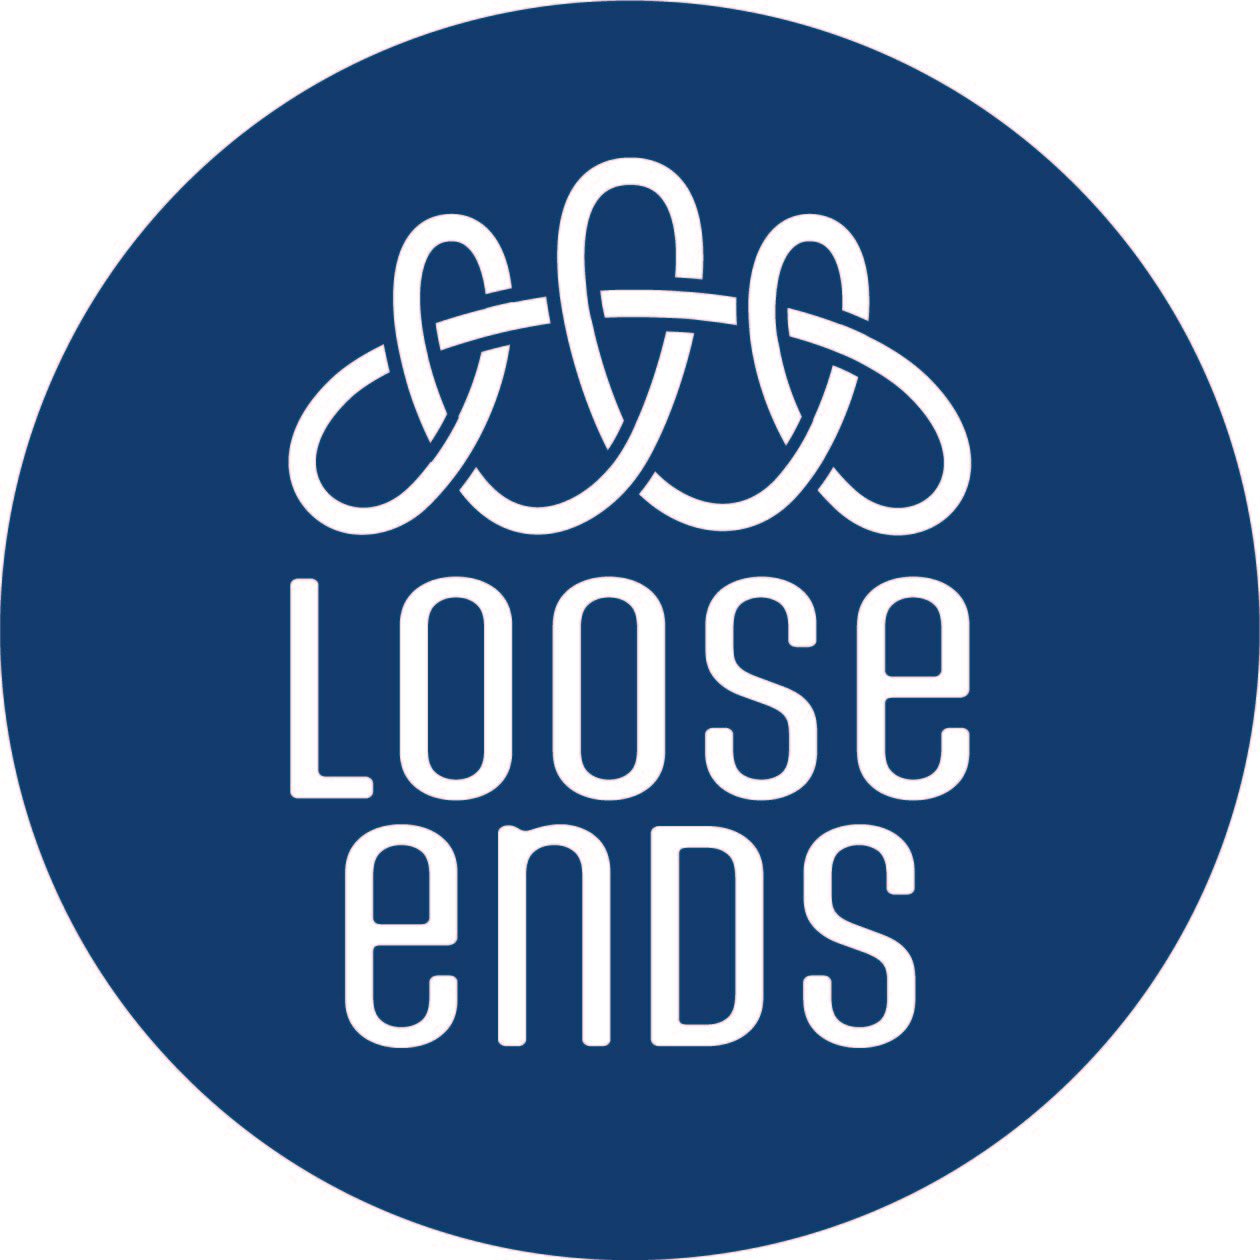 LOOSE ENDS